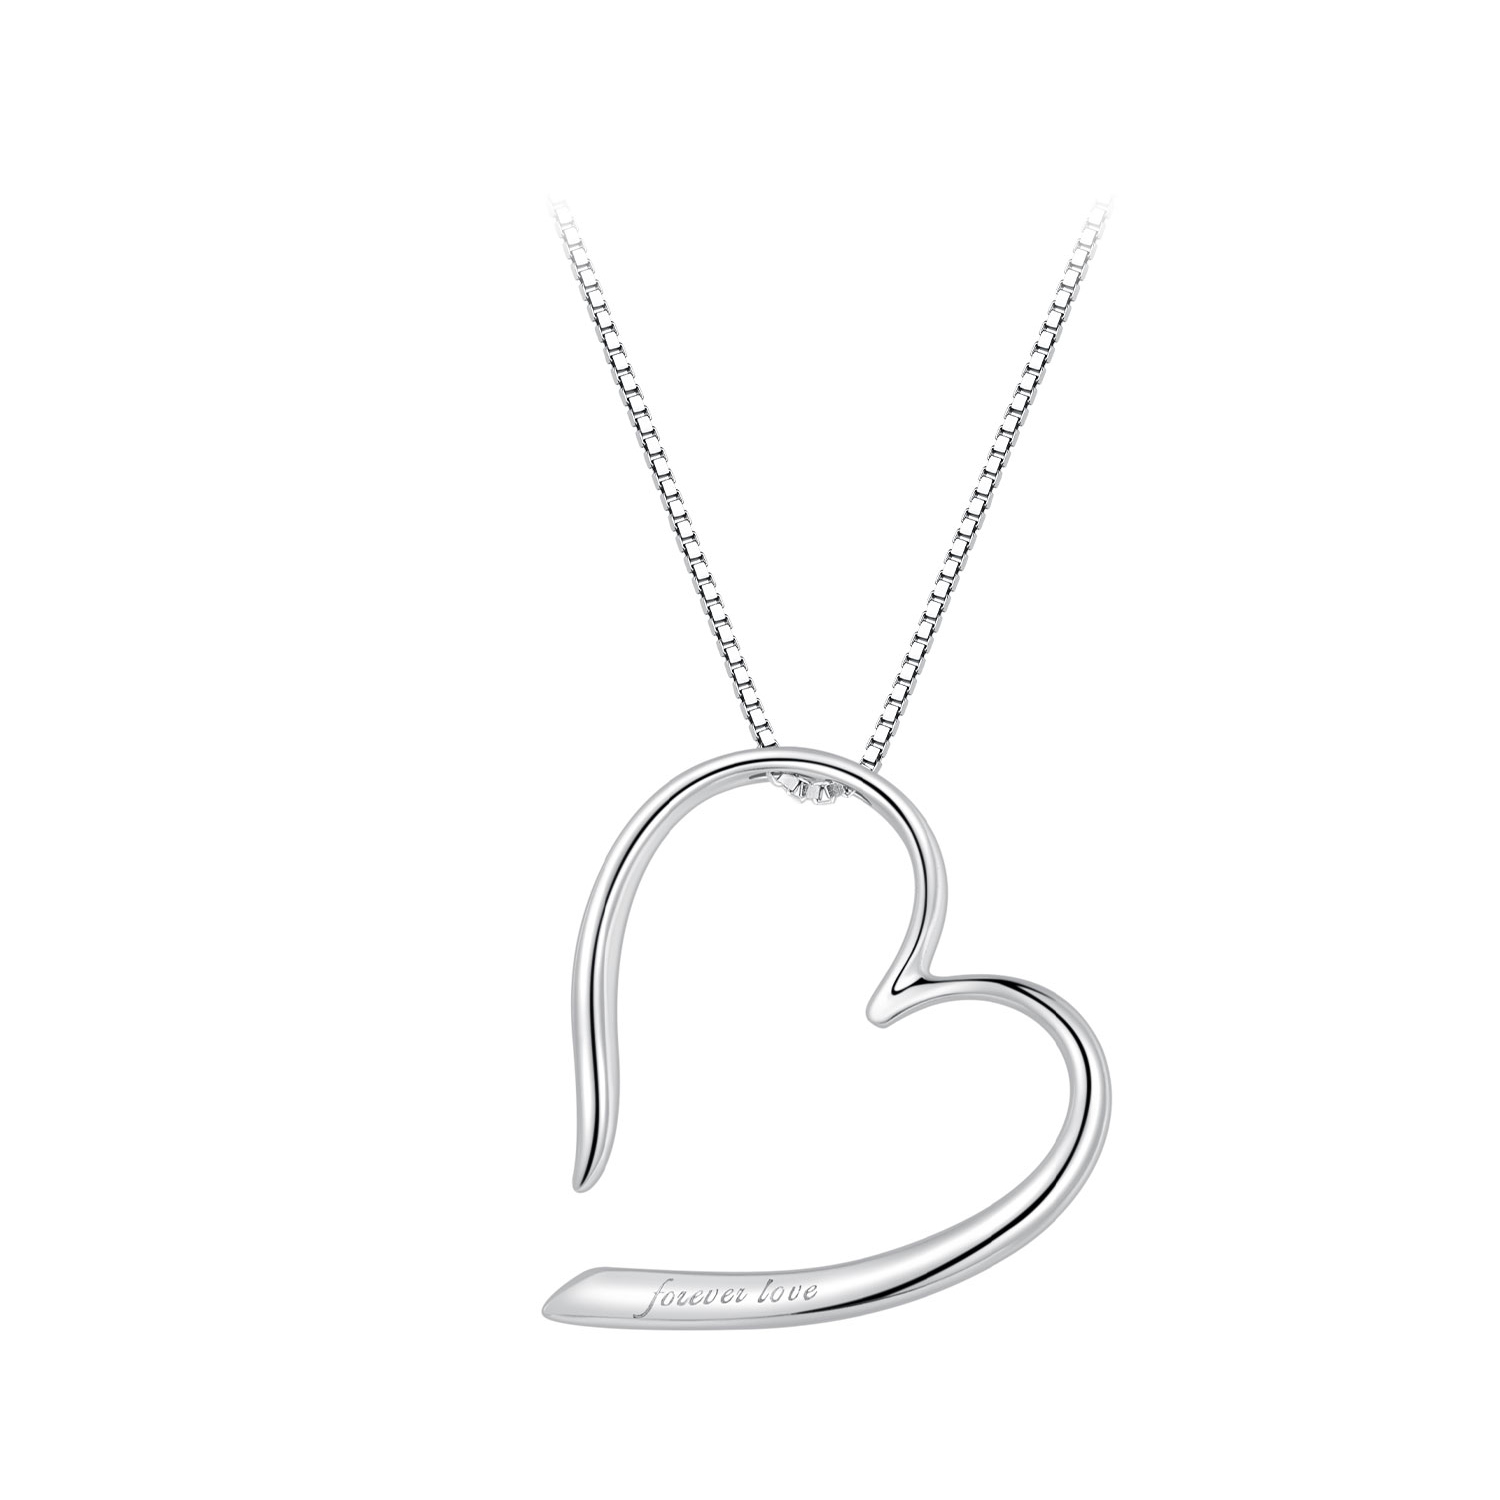 pandora style freehand heart necklace bsn341